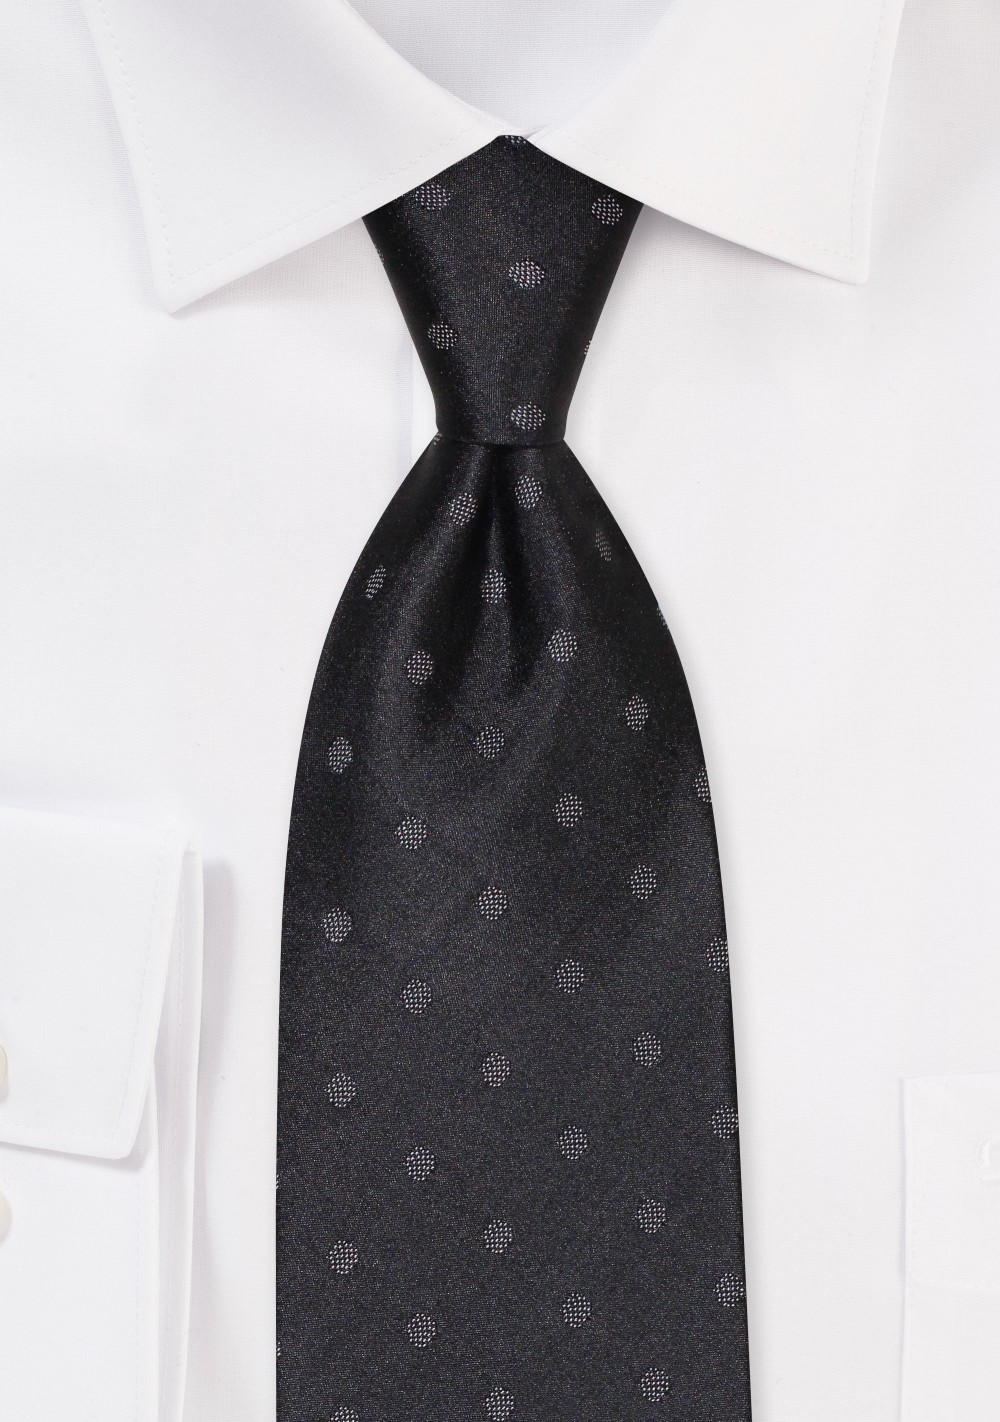 Black Silk Tie with Woven Polka Dots